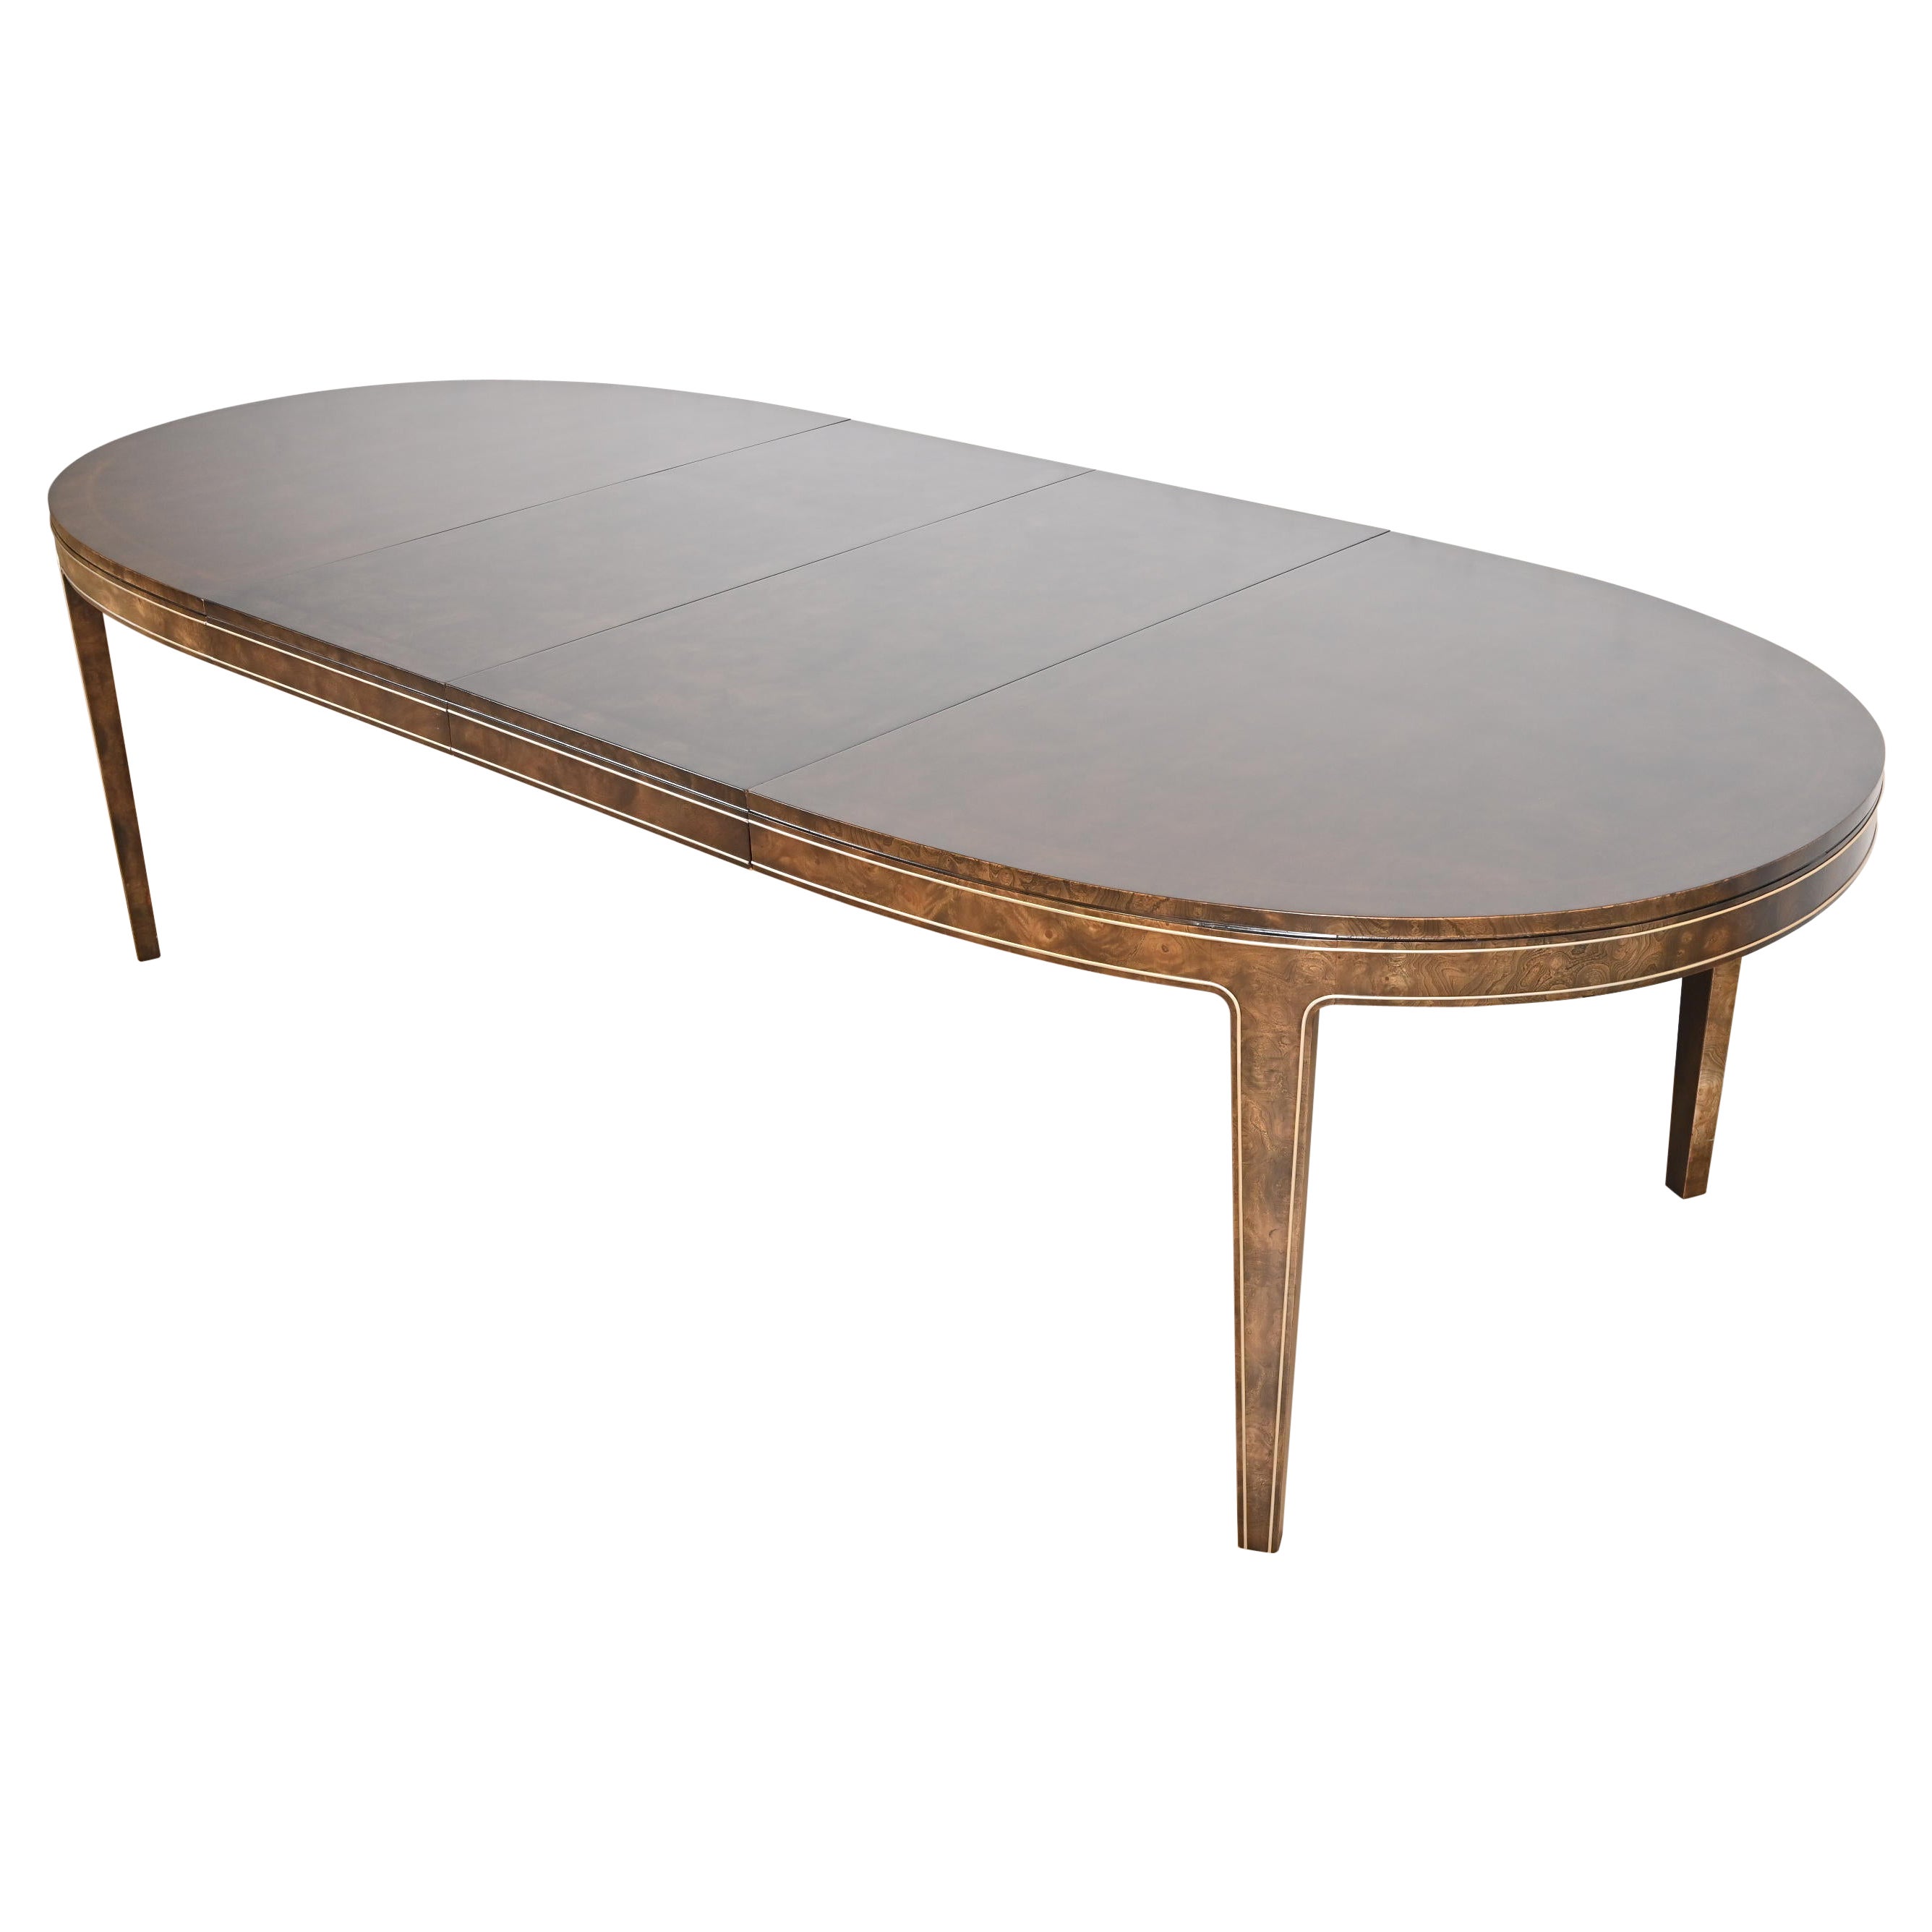 What are large dining tables called?